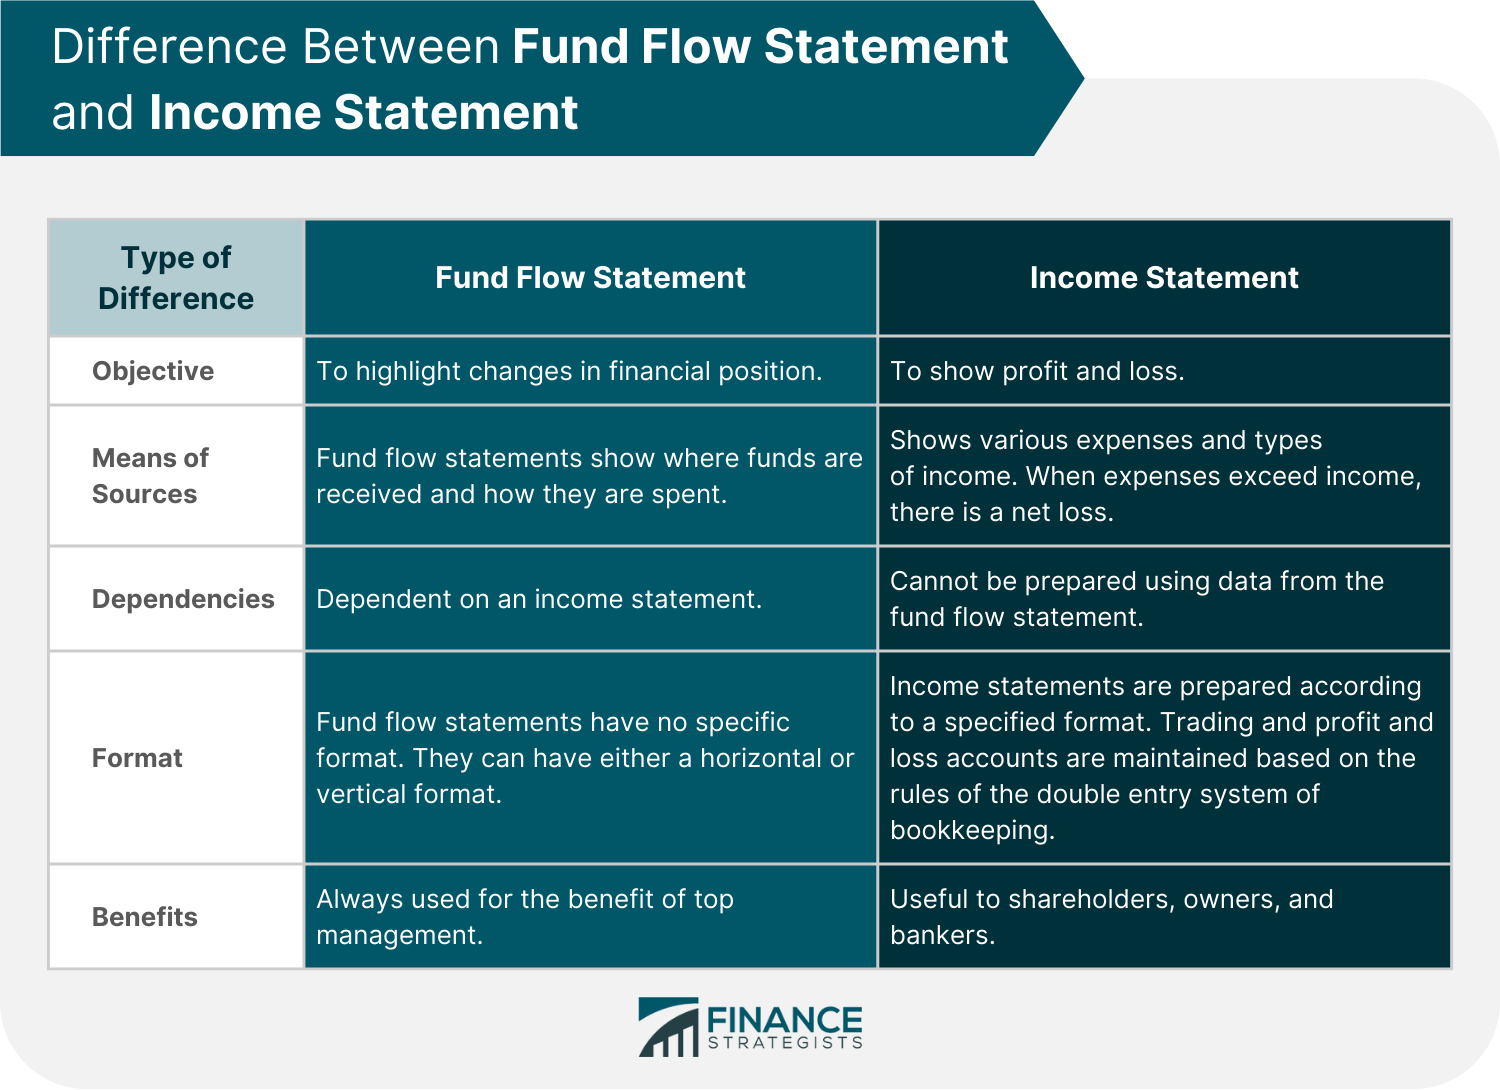 Difference Between Fund Flow Statement and Income Statement (LEFT)